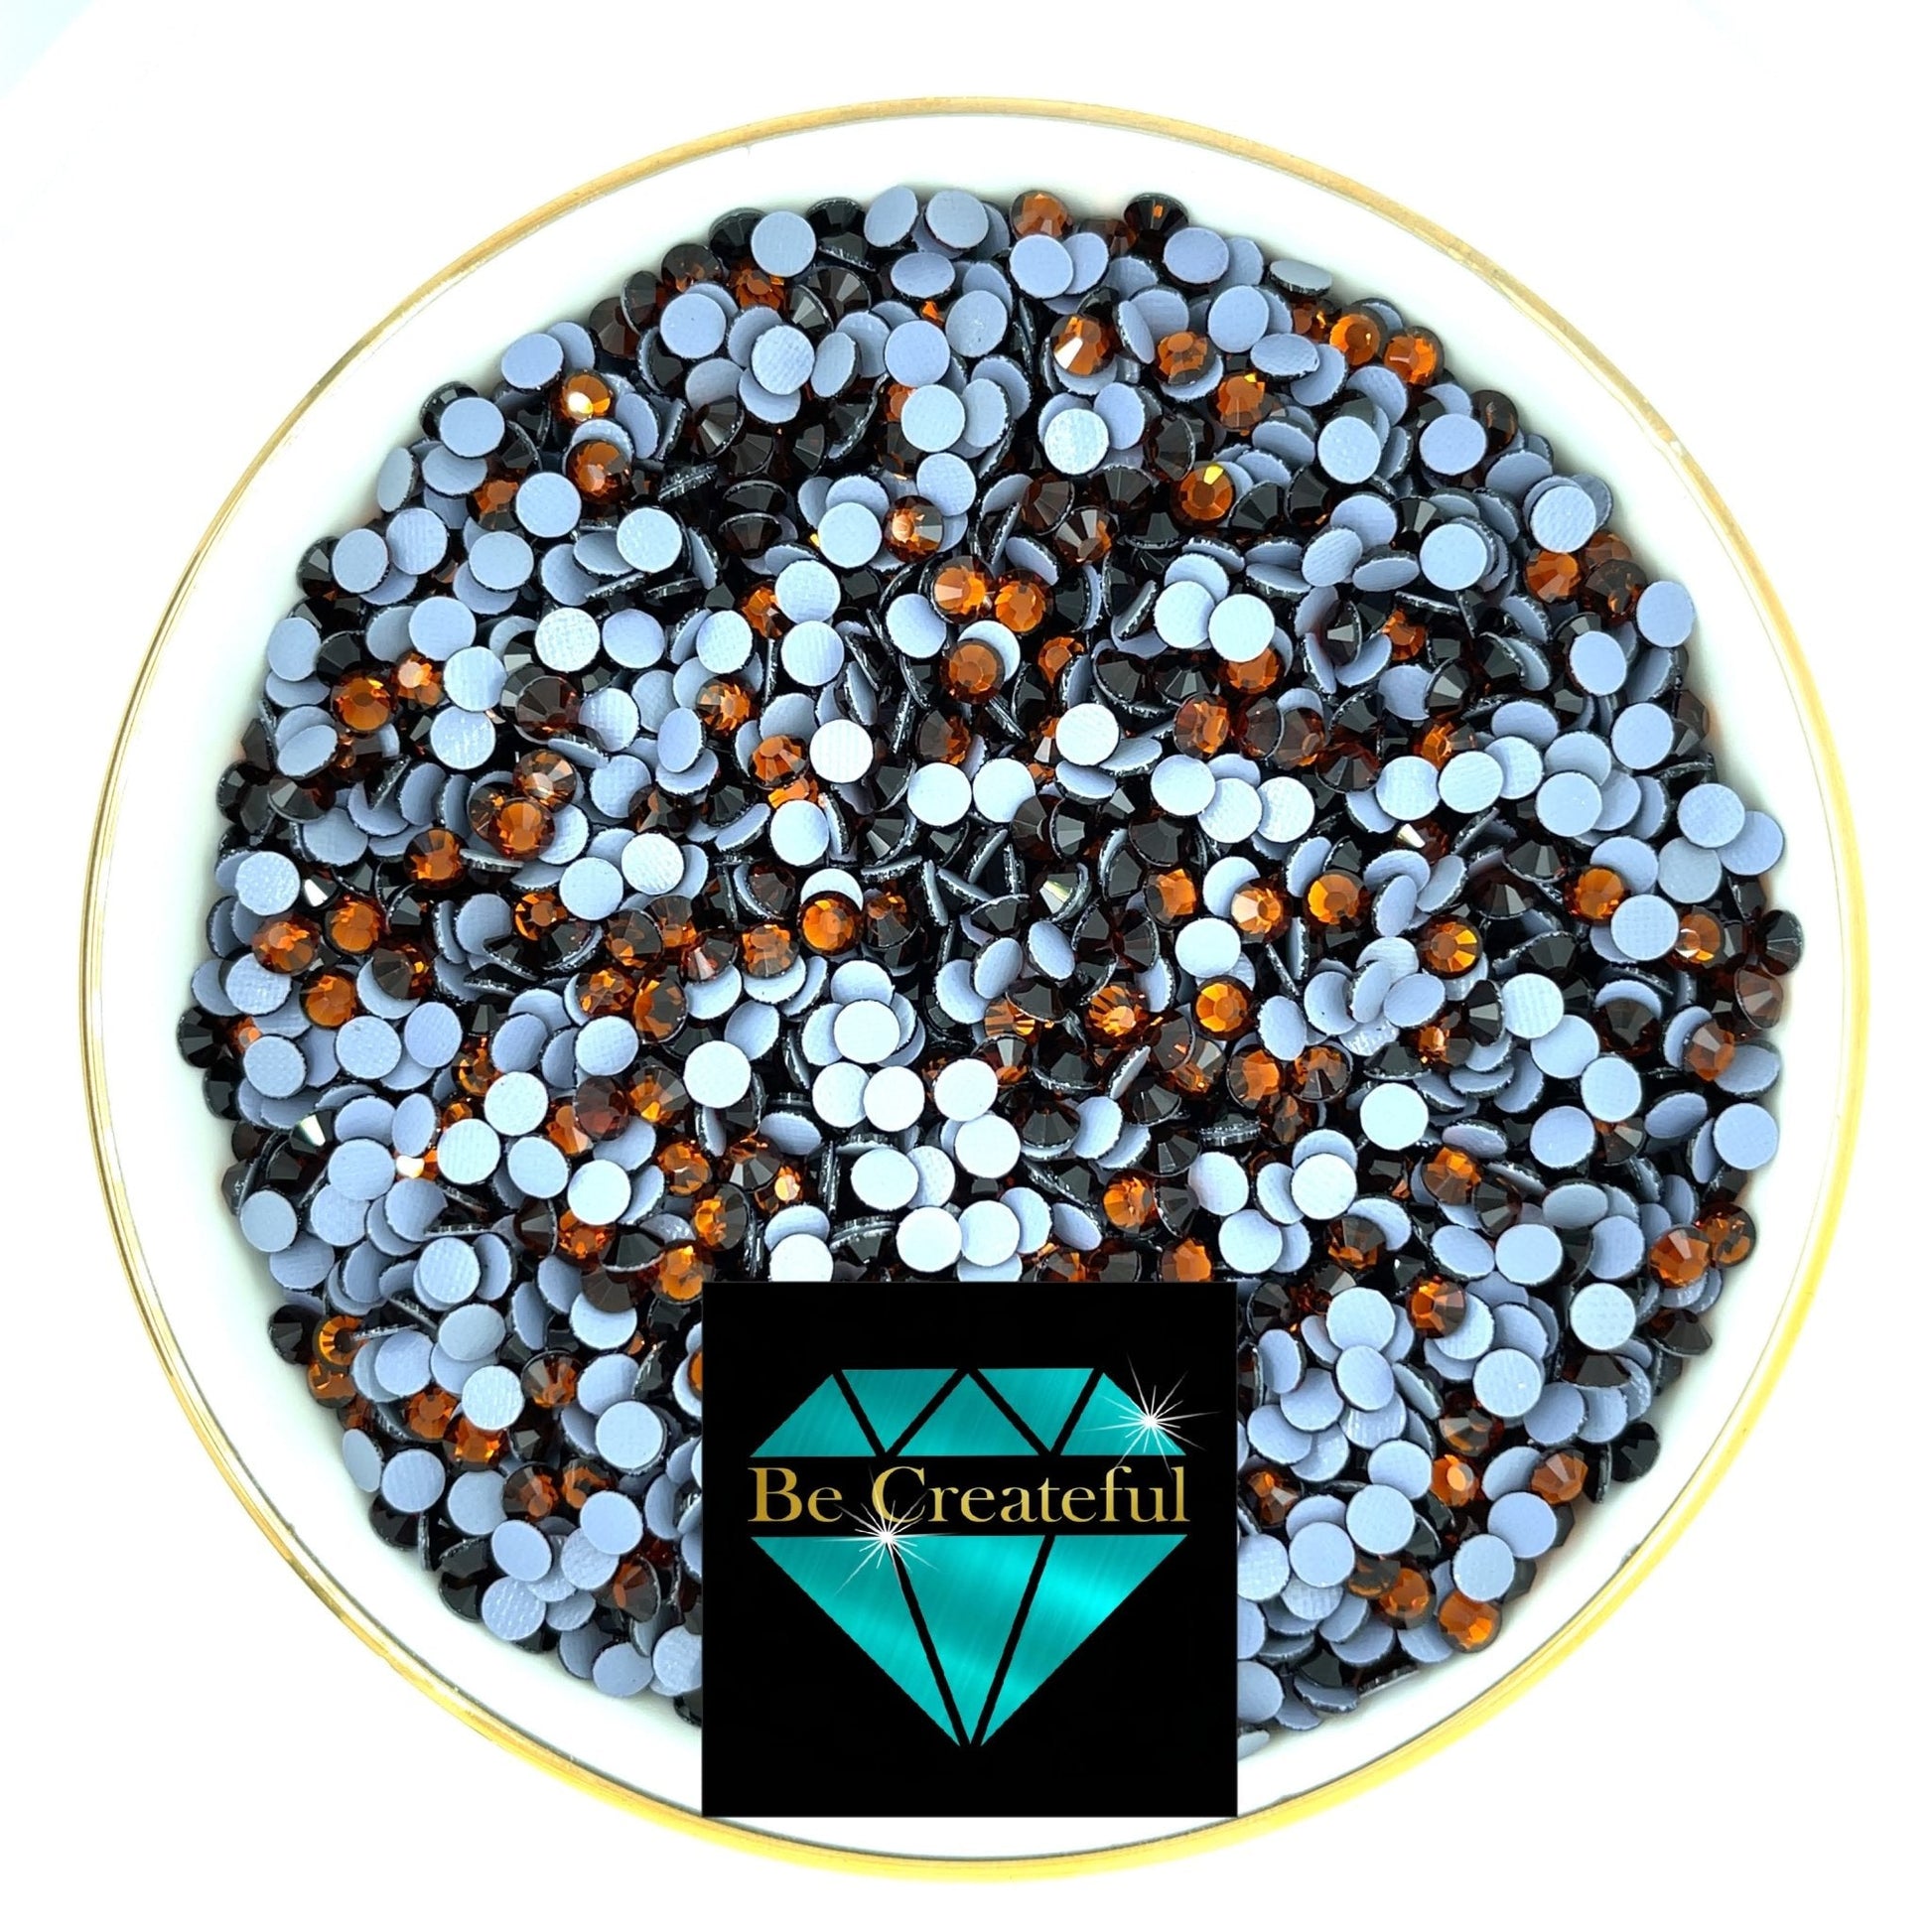 Hotfix LUXE® Coffee Dark Topaz Glass Rhinestones are high-quality 14-16 facet glass Rhinestones that provide intense sparkle and refraction 